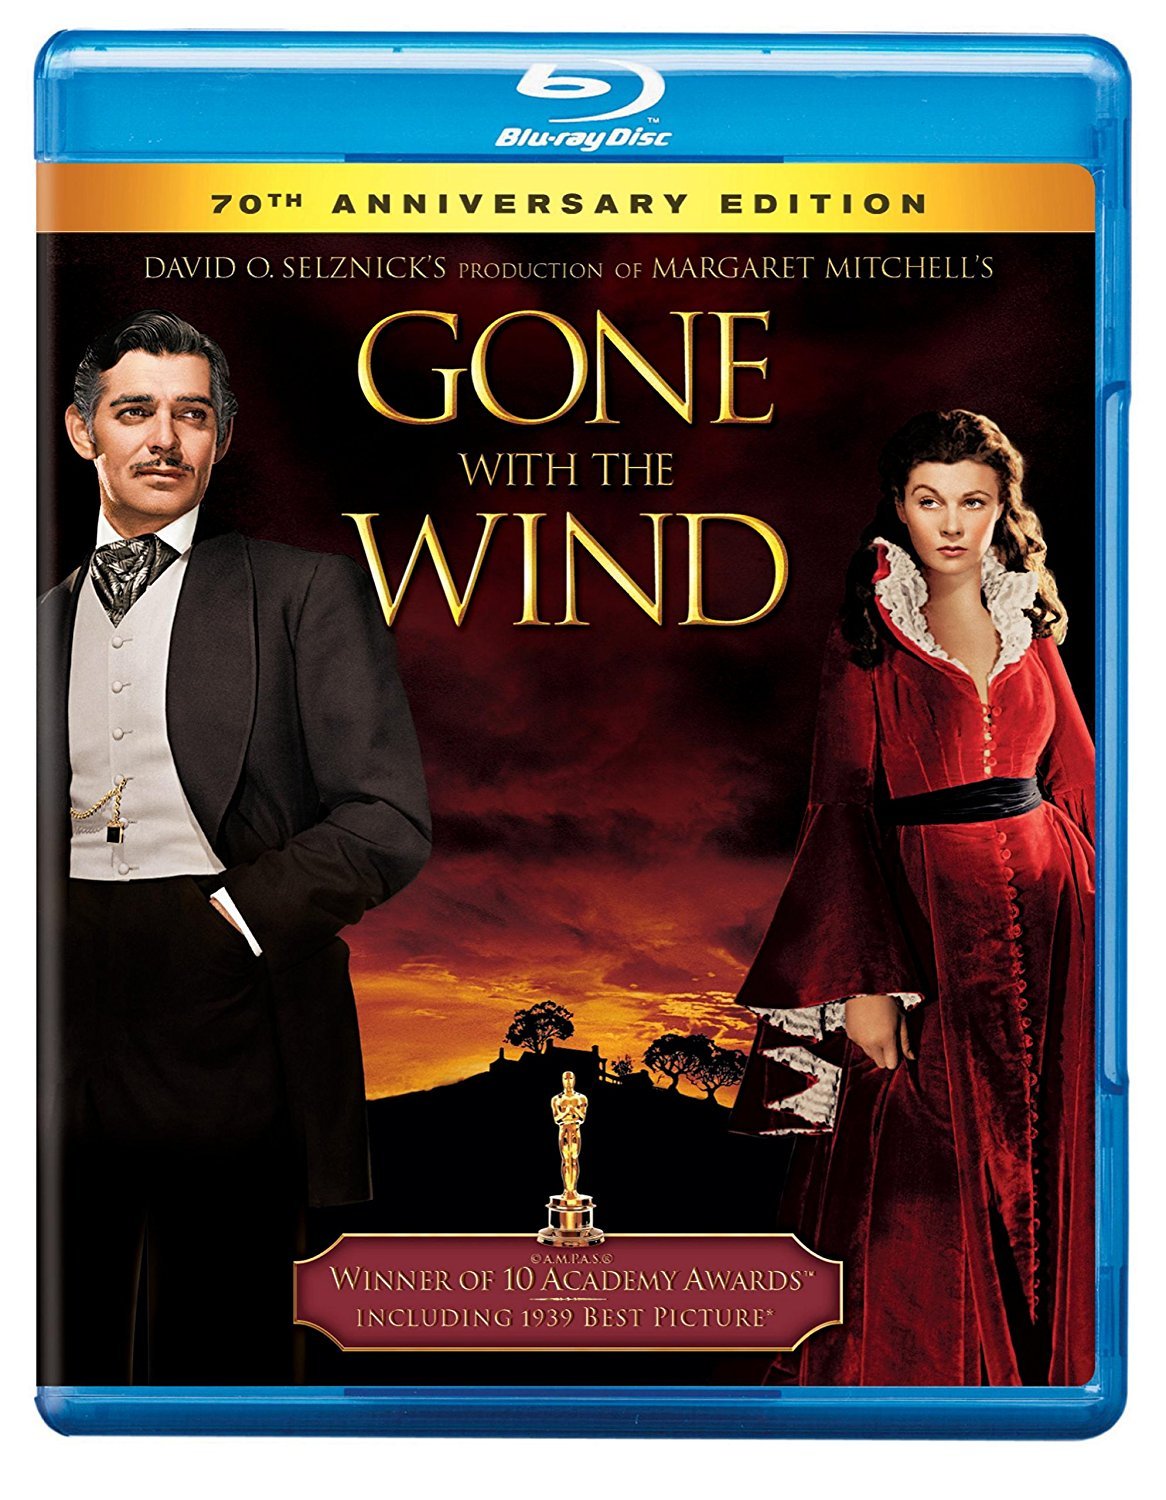 Gone with the wind download